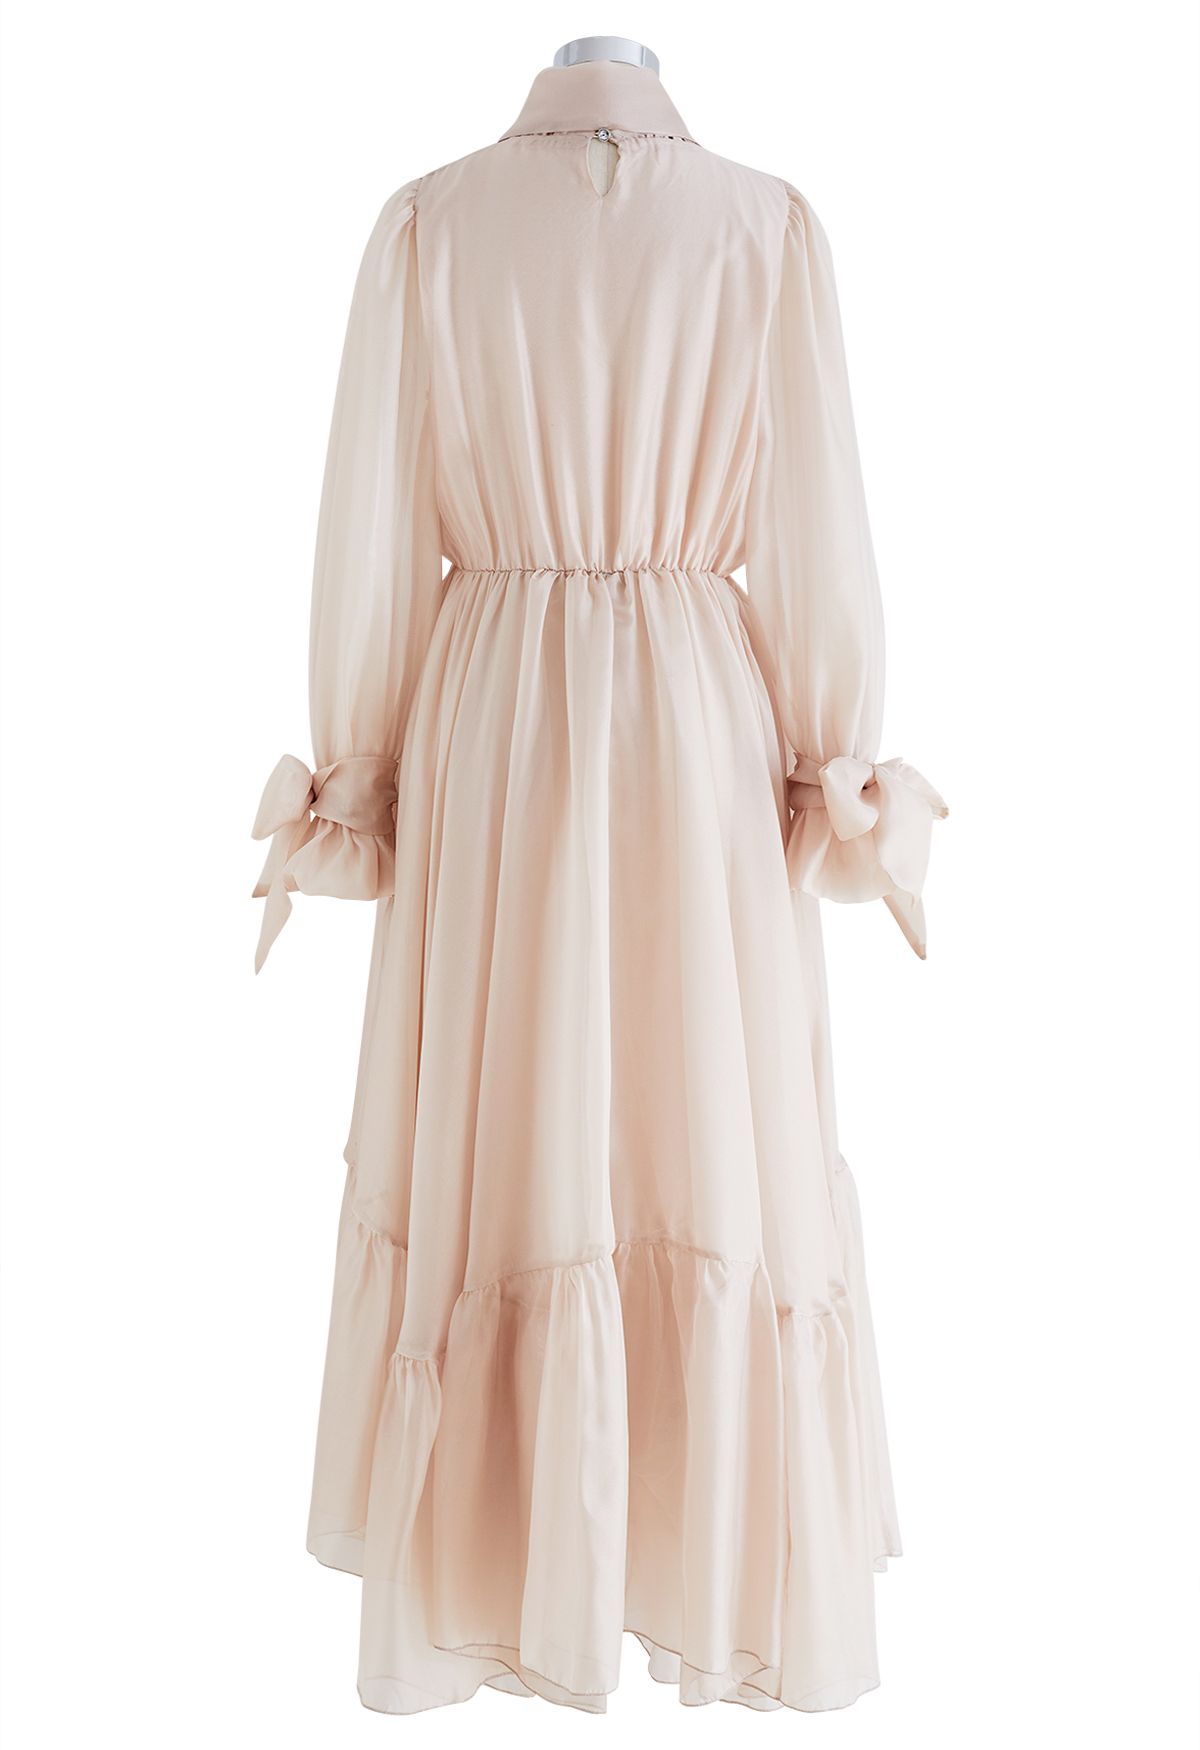 Gorgeous Bow Neck Sheer Mesh Frilling Dress in Apricot